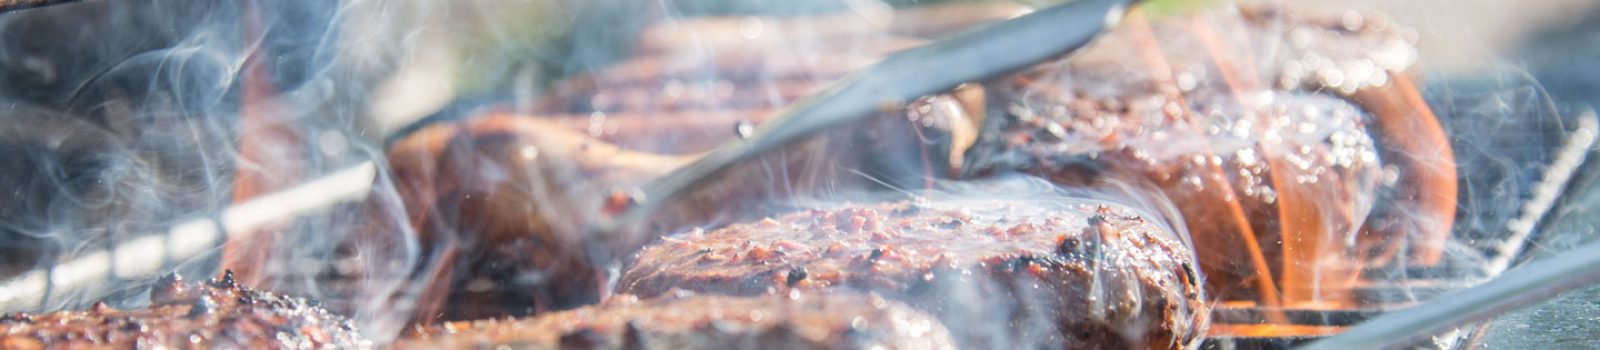 close-photography-of-grilled-meat-on-griddle-1105325